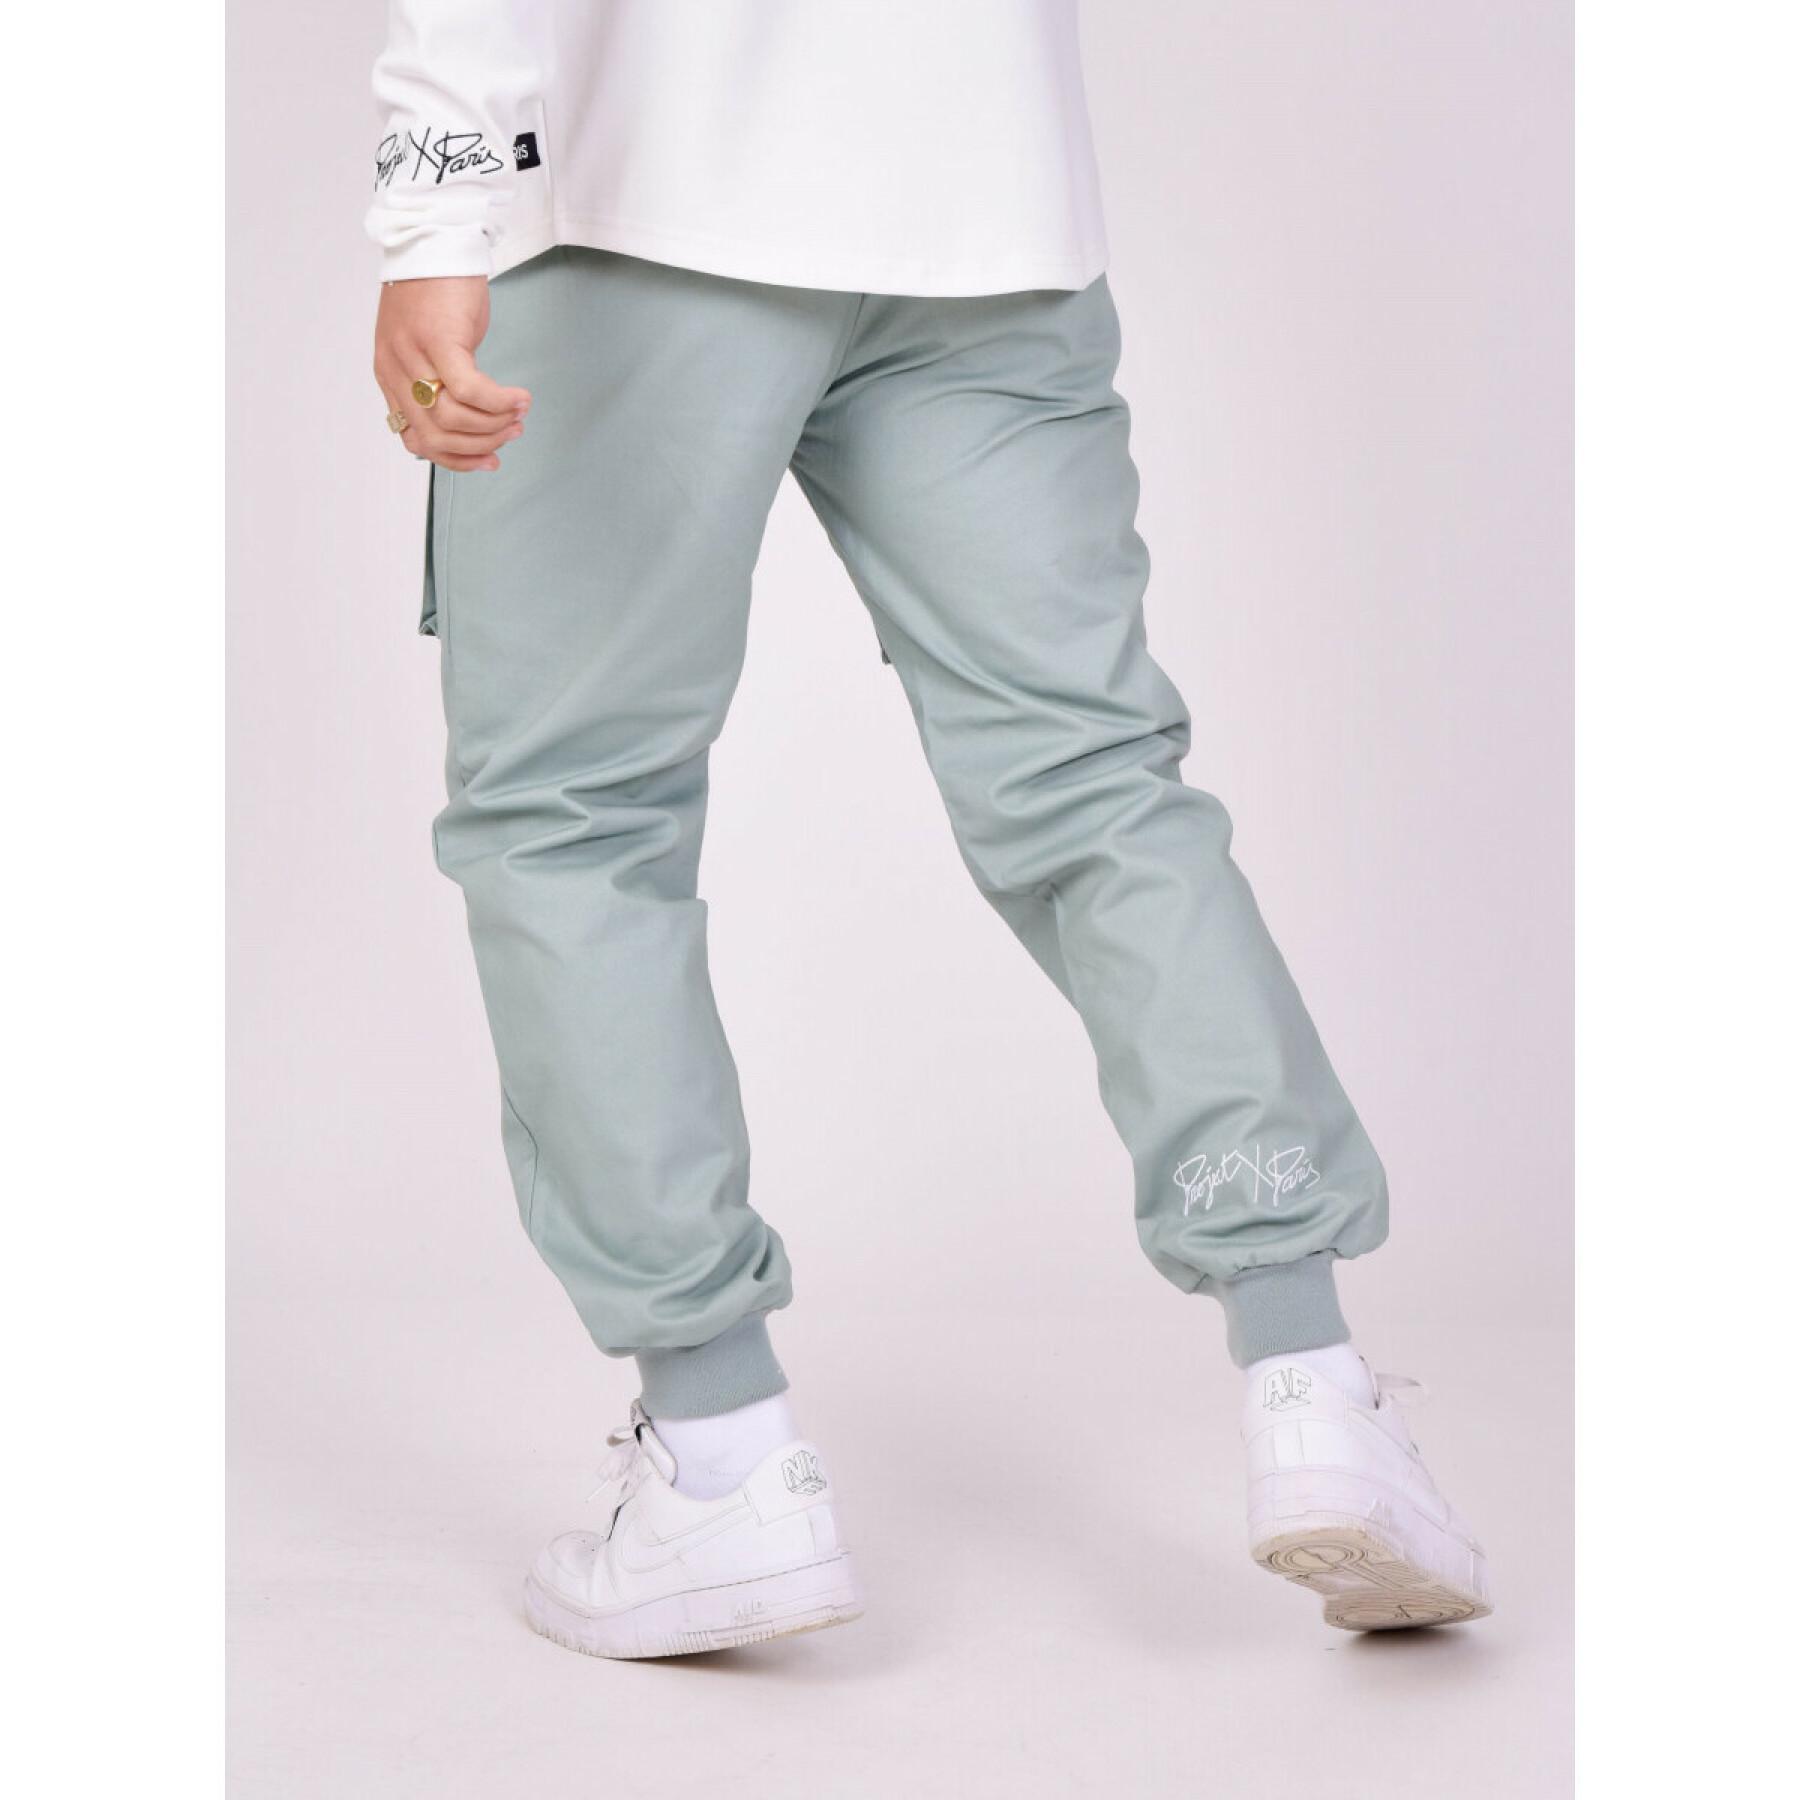 Cargo style jogging suit with front pockets Project X Paris